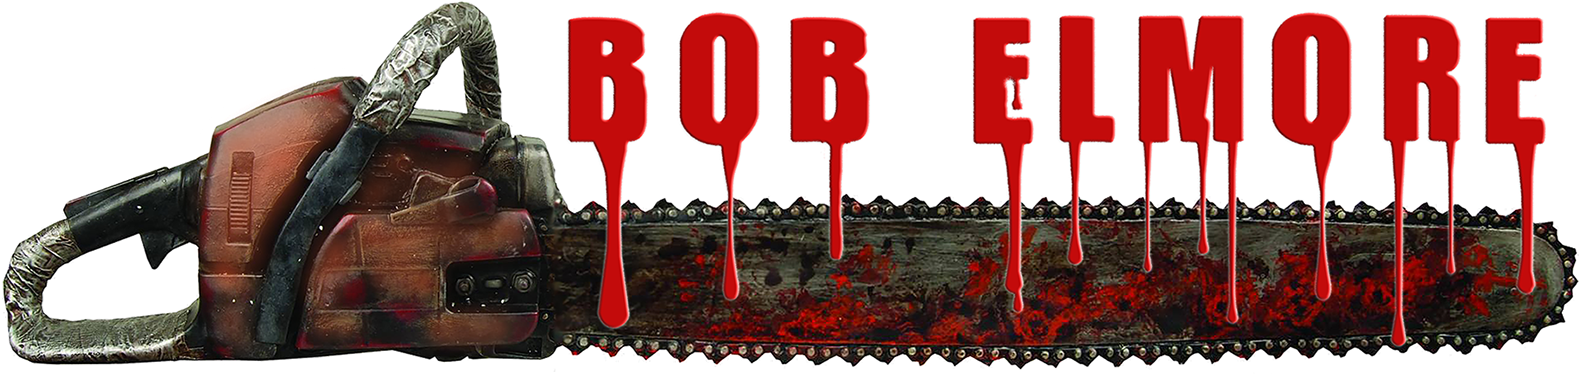 Chainsaw Bob Elmore Bloody Text PNG